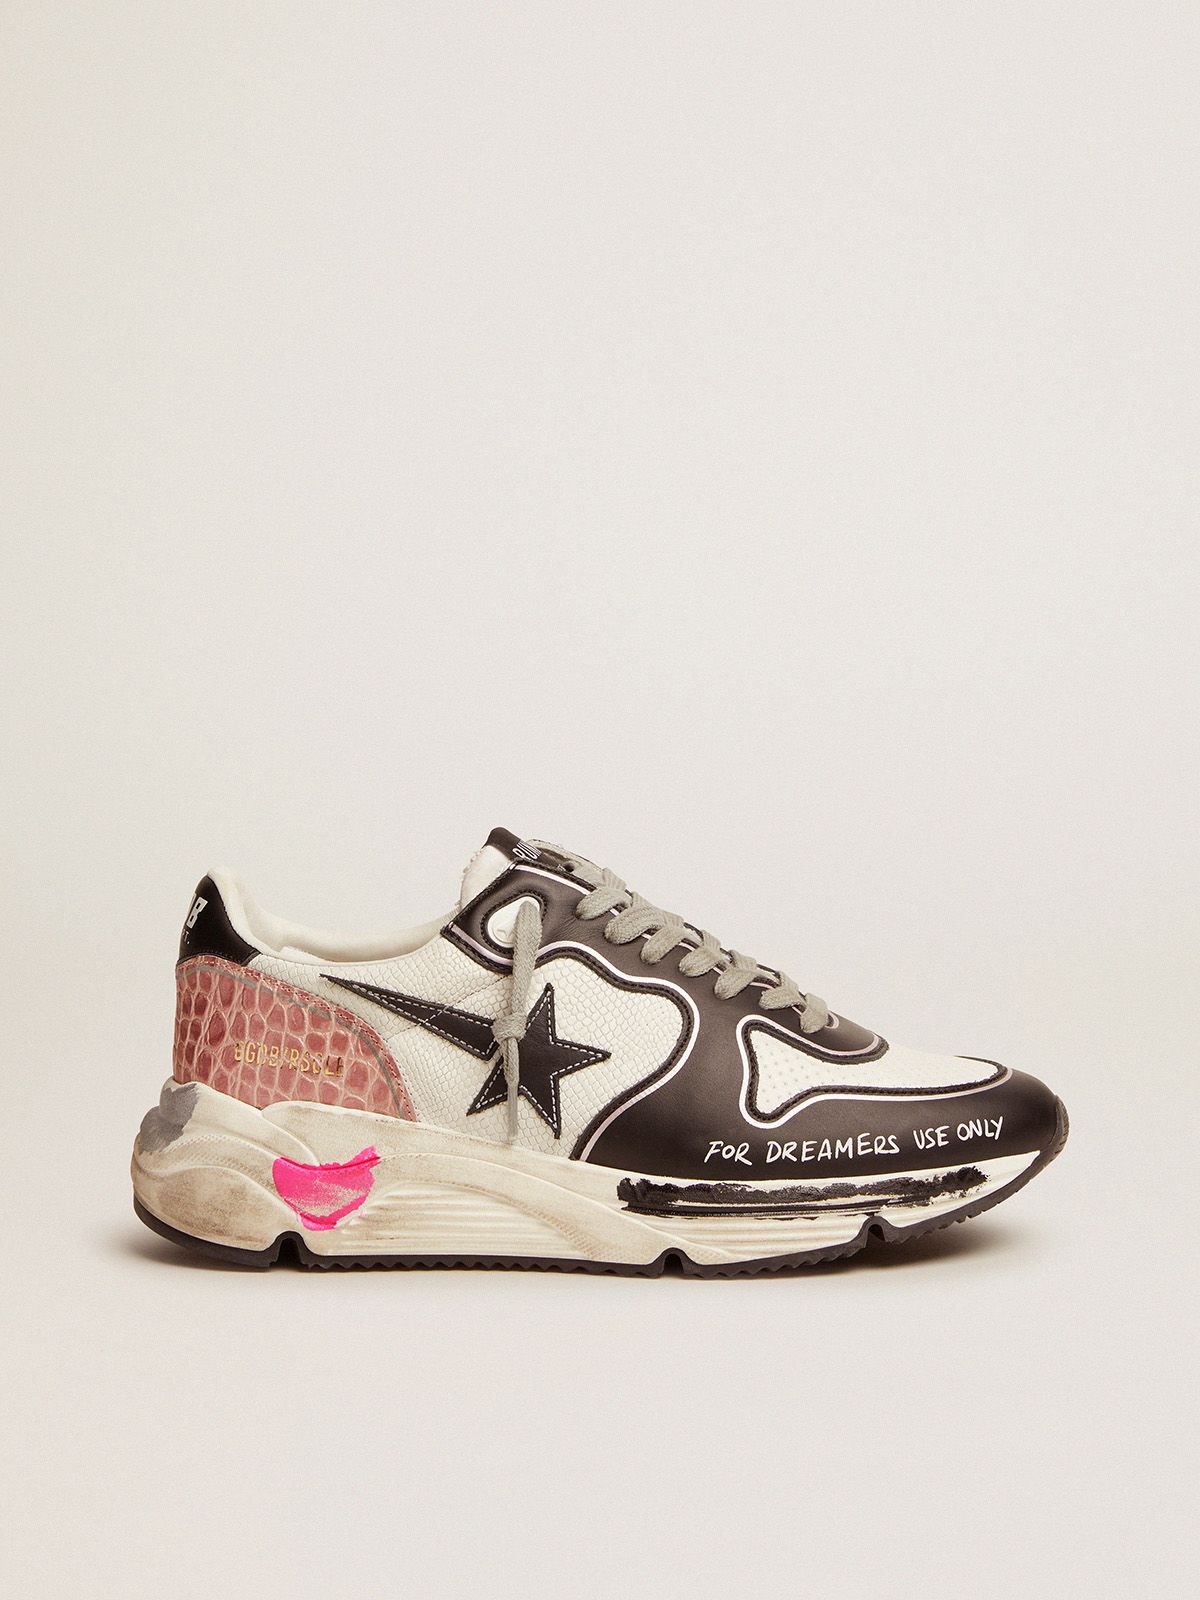 Running Sole sneakers in white snake-print leather with contrasting black details | 